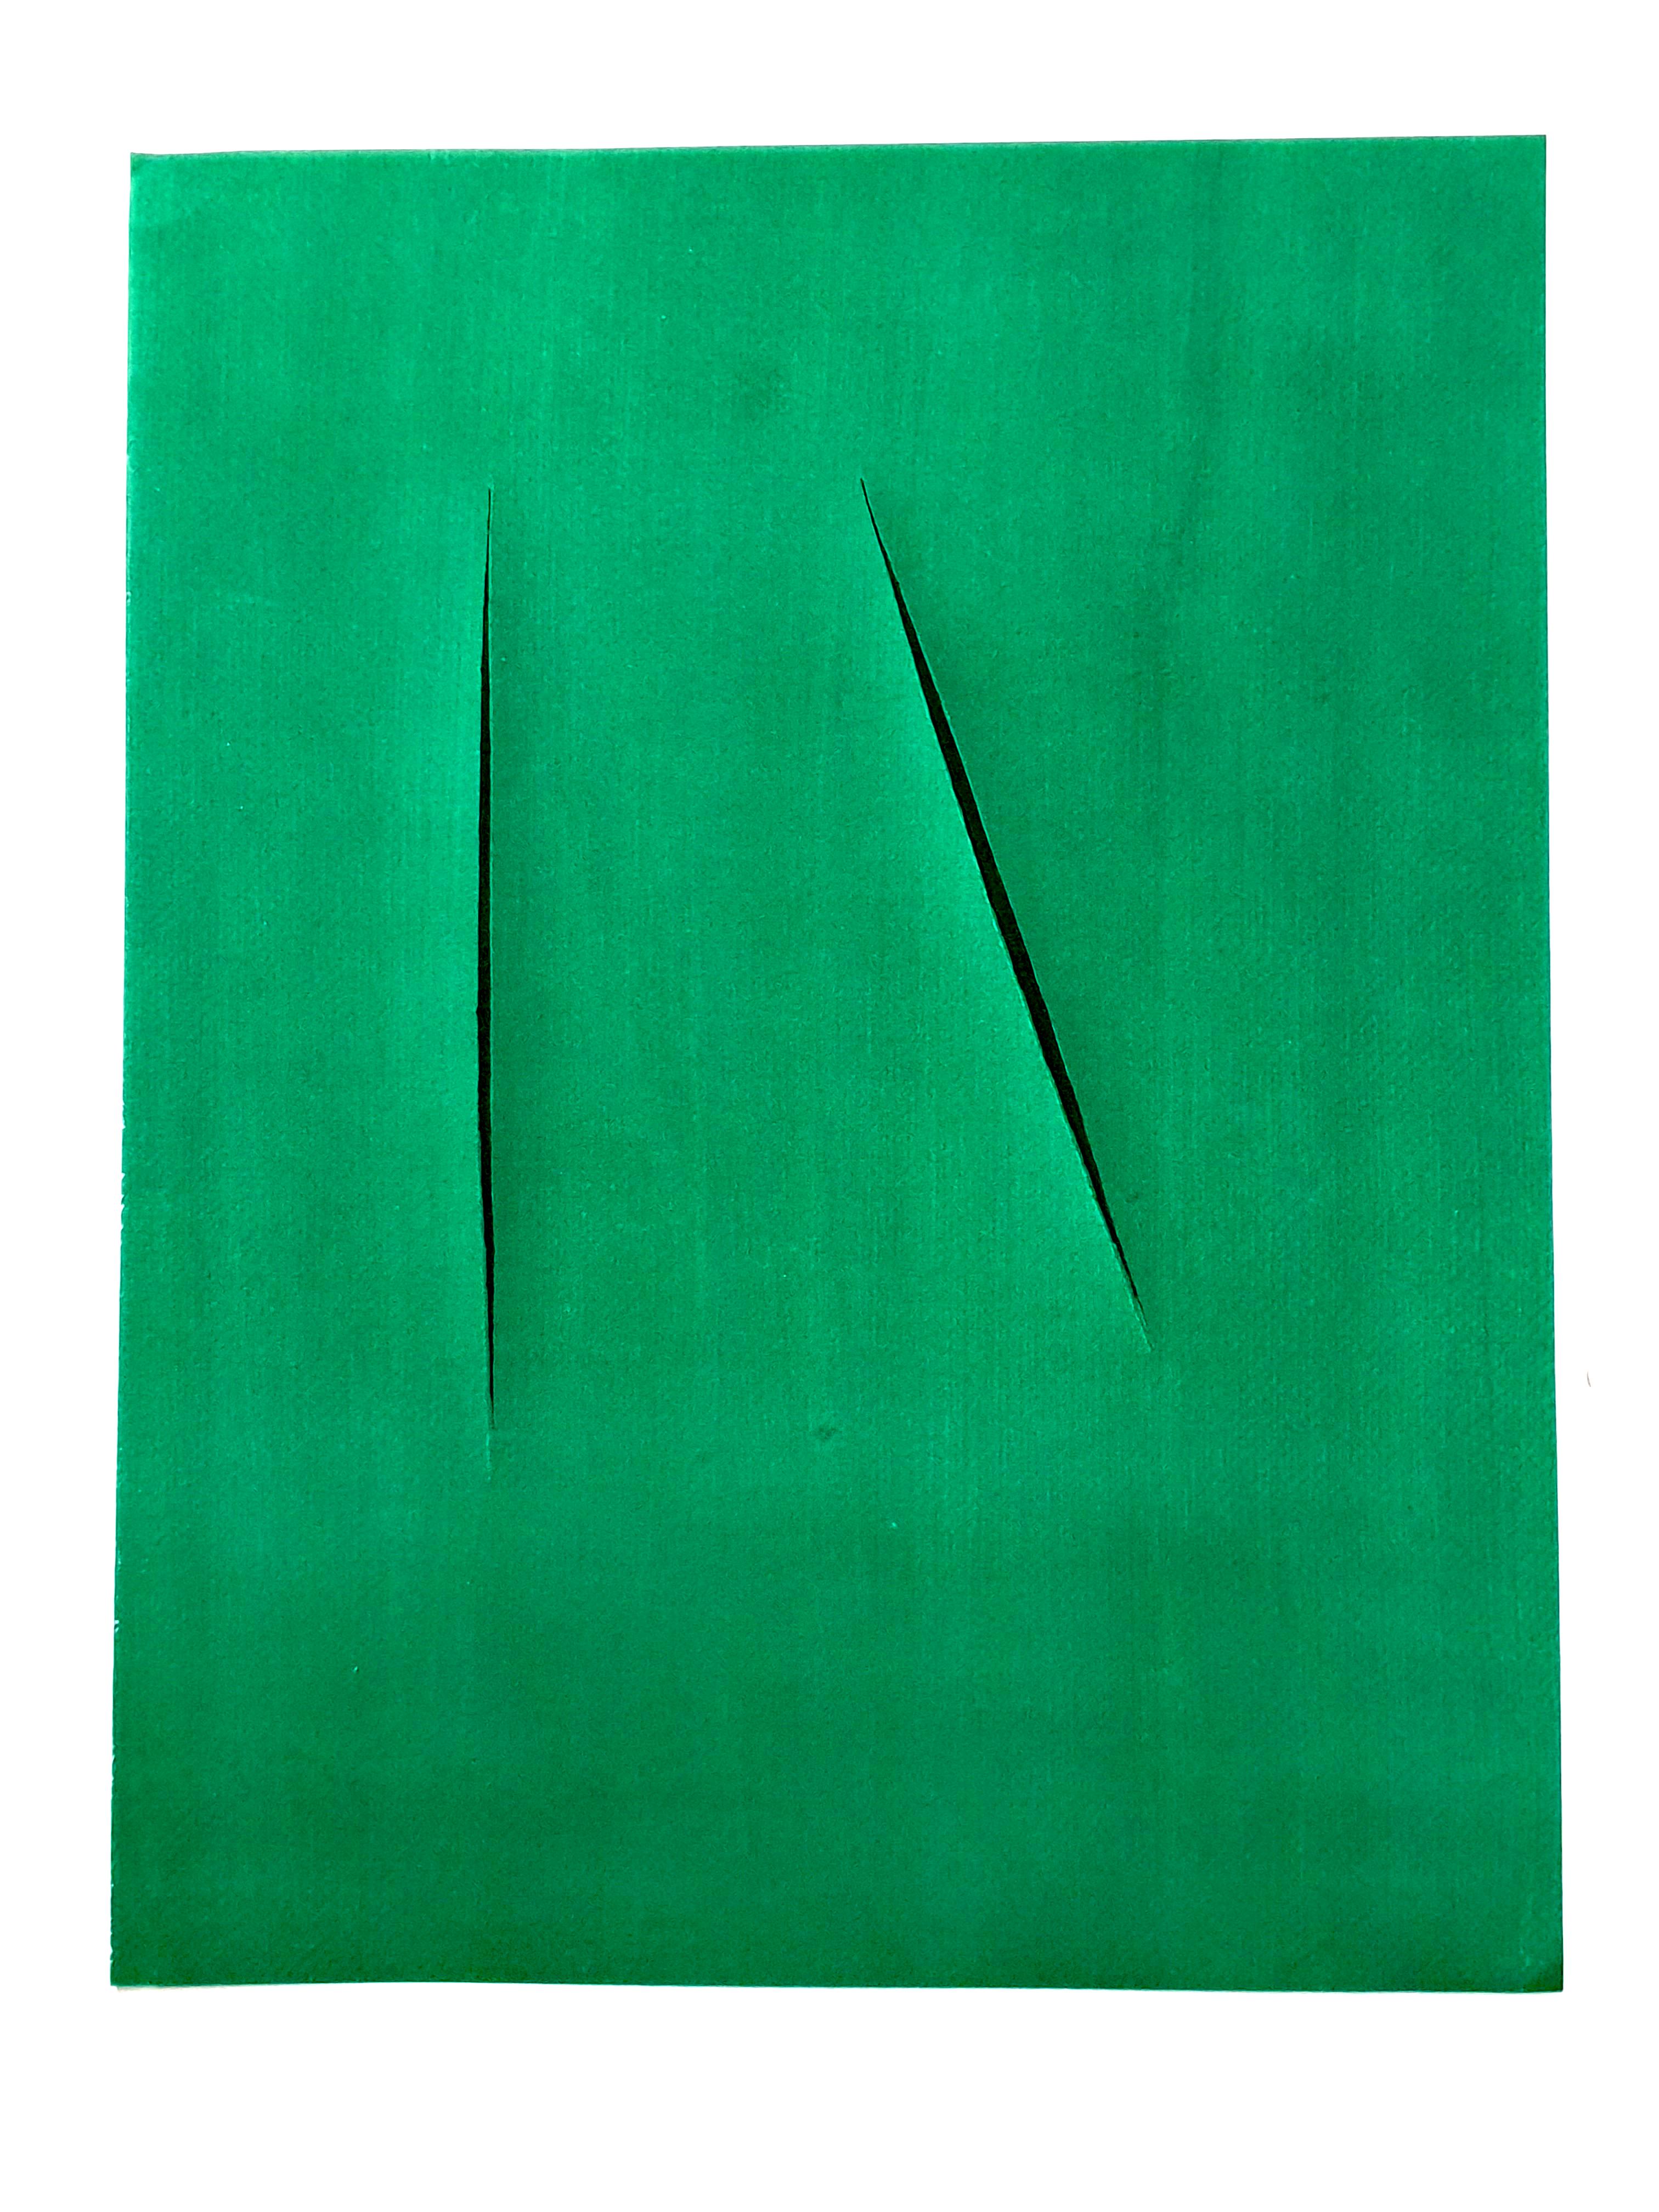 (after) Lucio Fontana - Composition - Pochoir
Published in the deluxe art review, XXe Siecle
1959
Dimensions: 32 x 24 cm 
Publisher: G. di San Lazzaro.

Lucio Fontana
Lucio Fontana was born in 1899 in Rosario de Santa Fe (Argentina). His father was